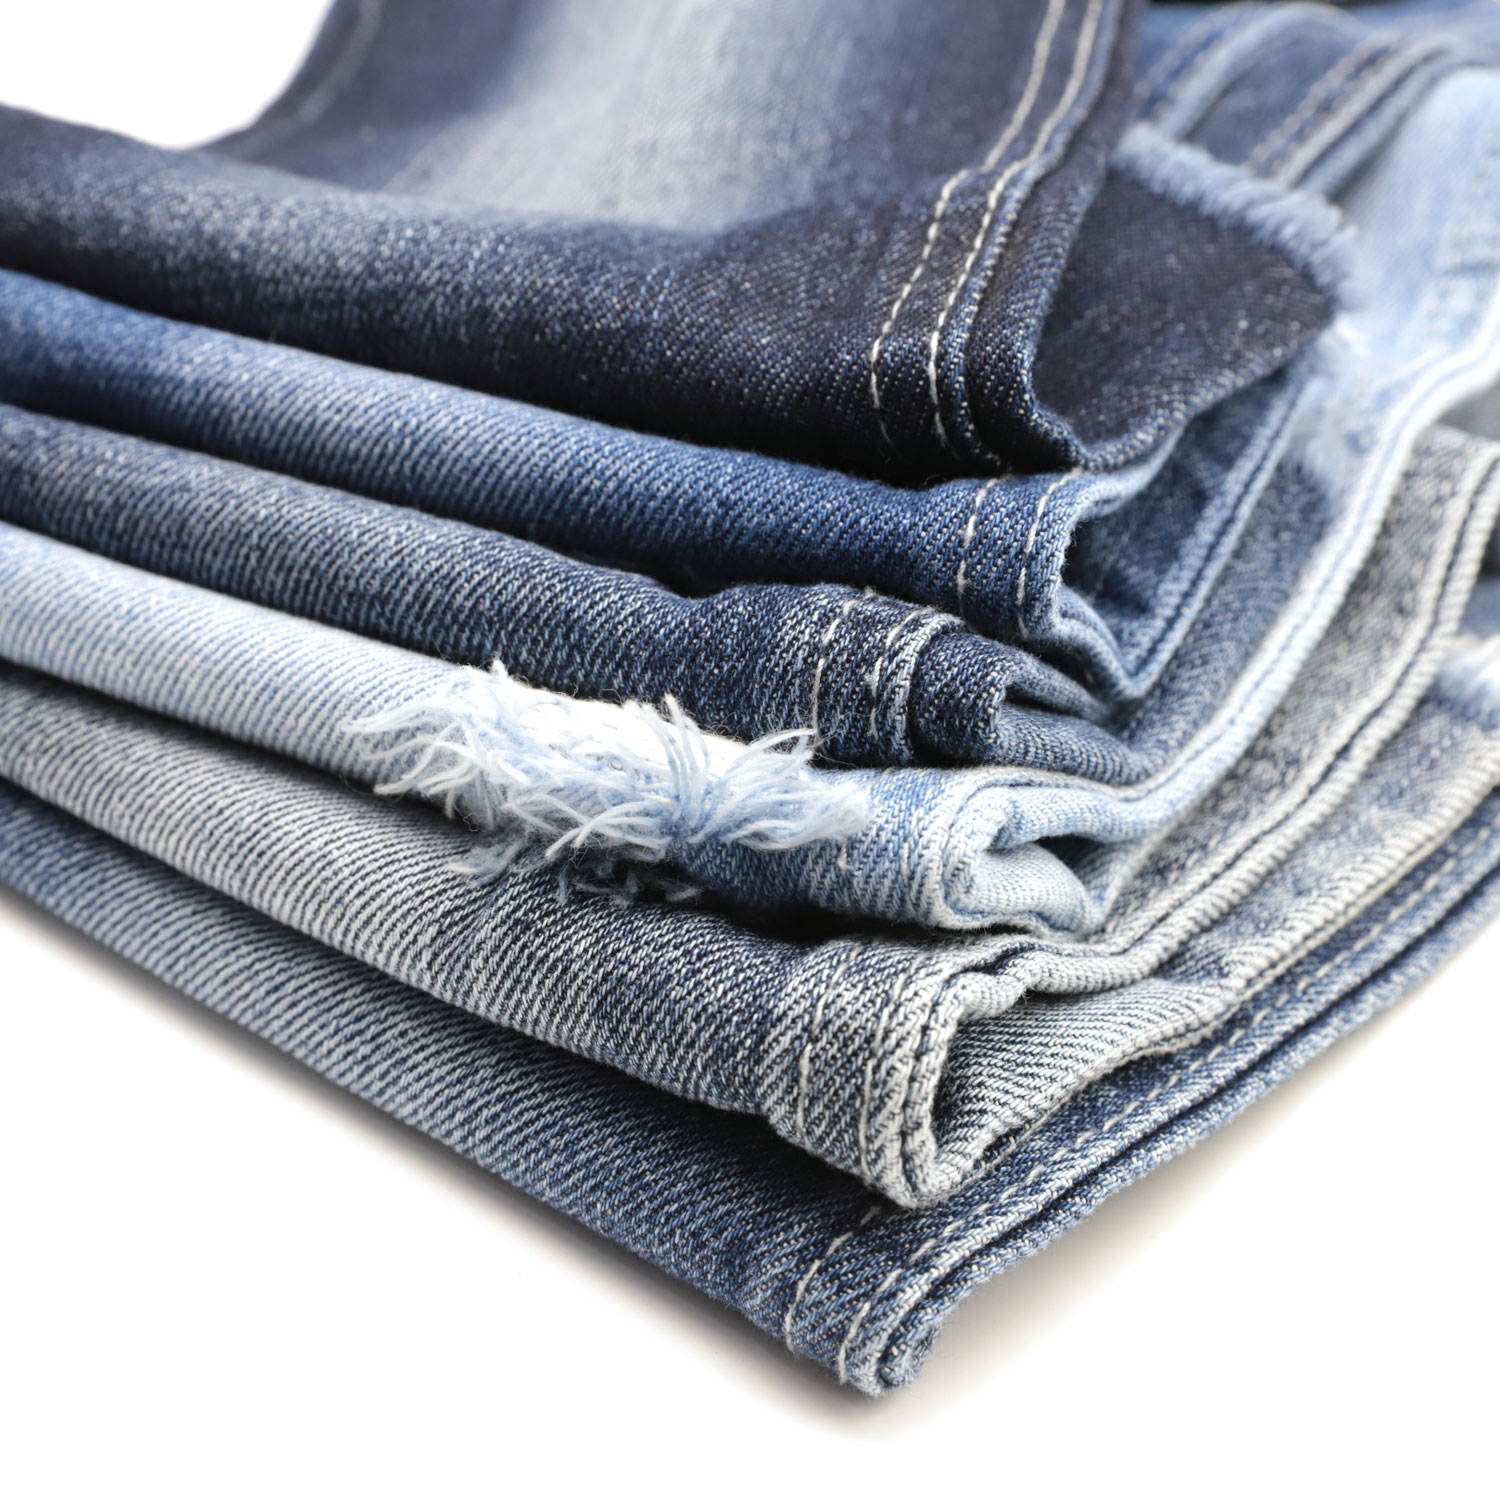 What You Should Know Before Spending Money on Mens Ripped Denim Jeans 2